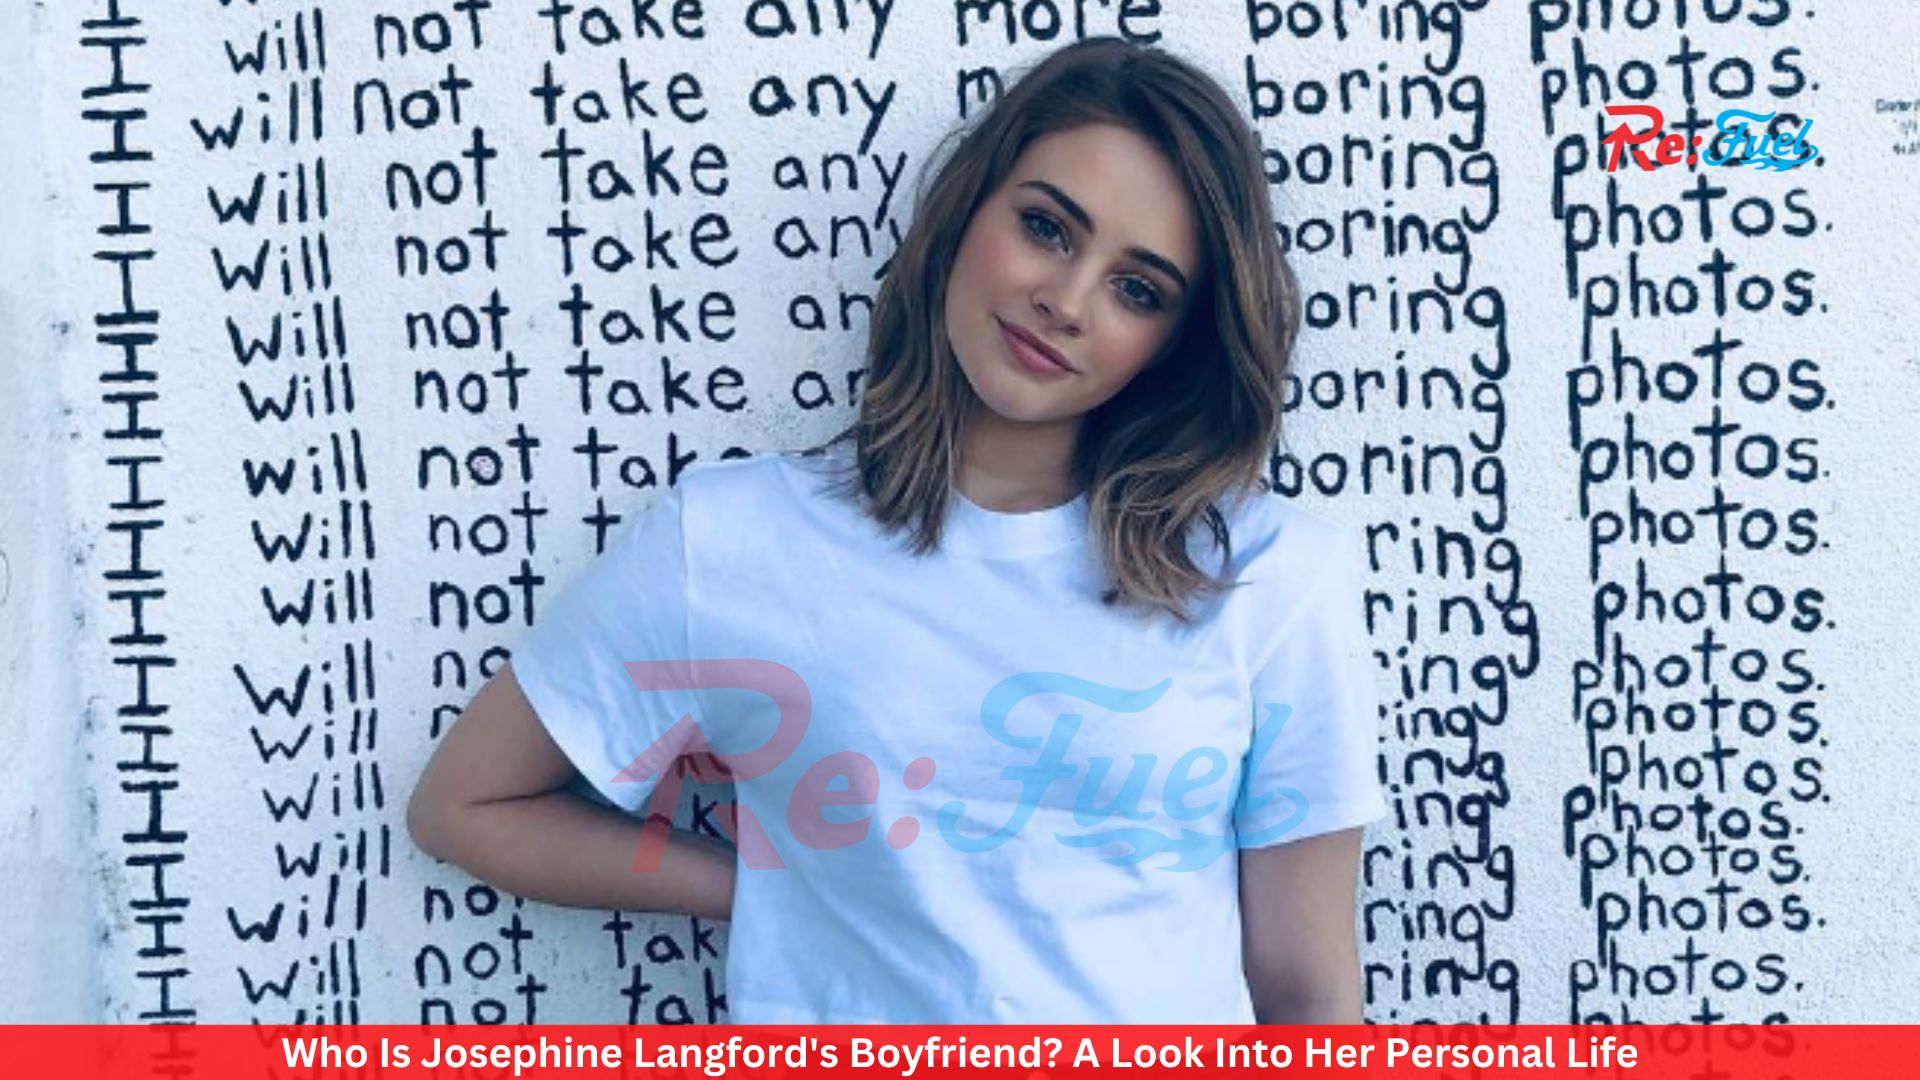 Who Is Josephine Langford's Boyfriend? A Look Into Her Personal Life